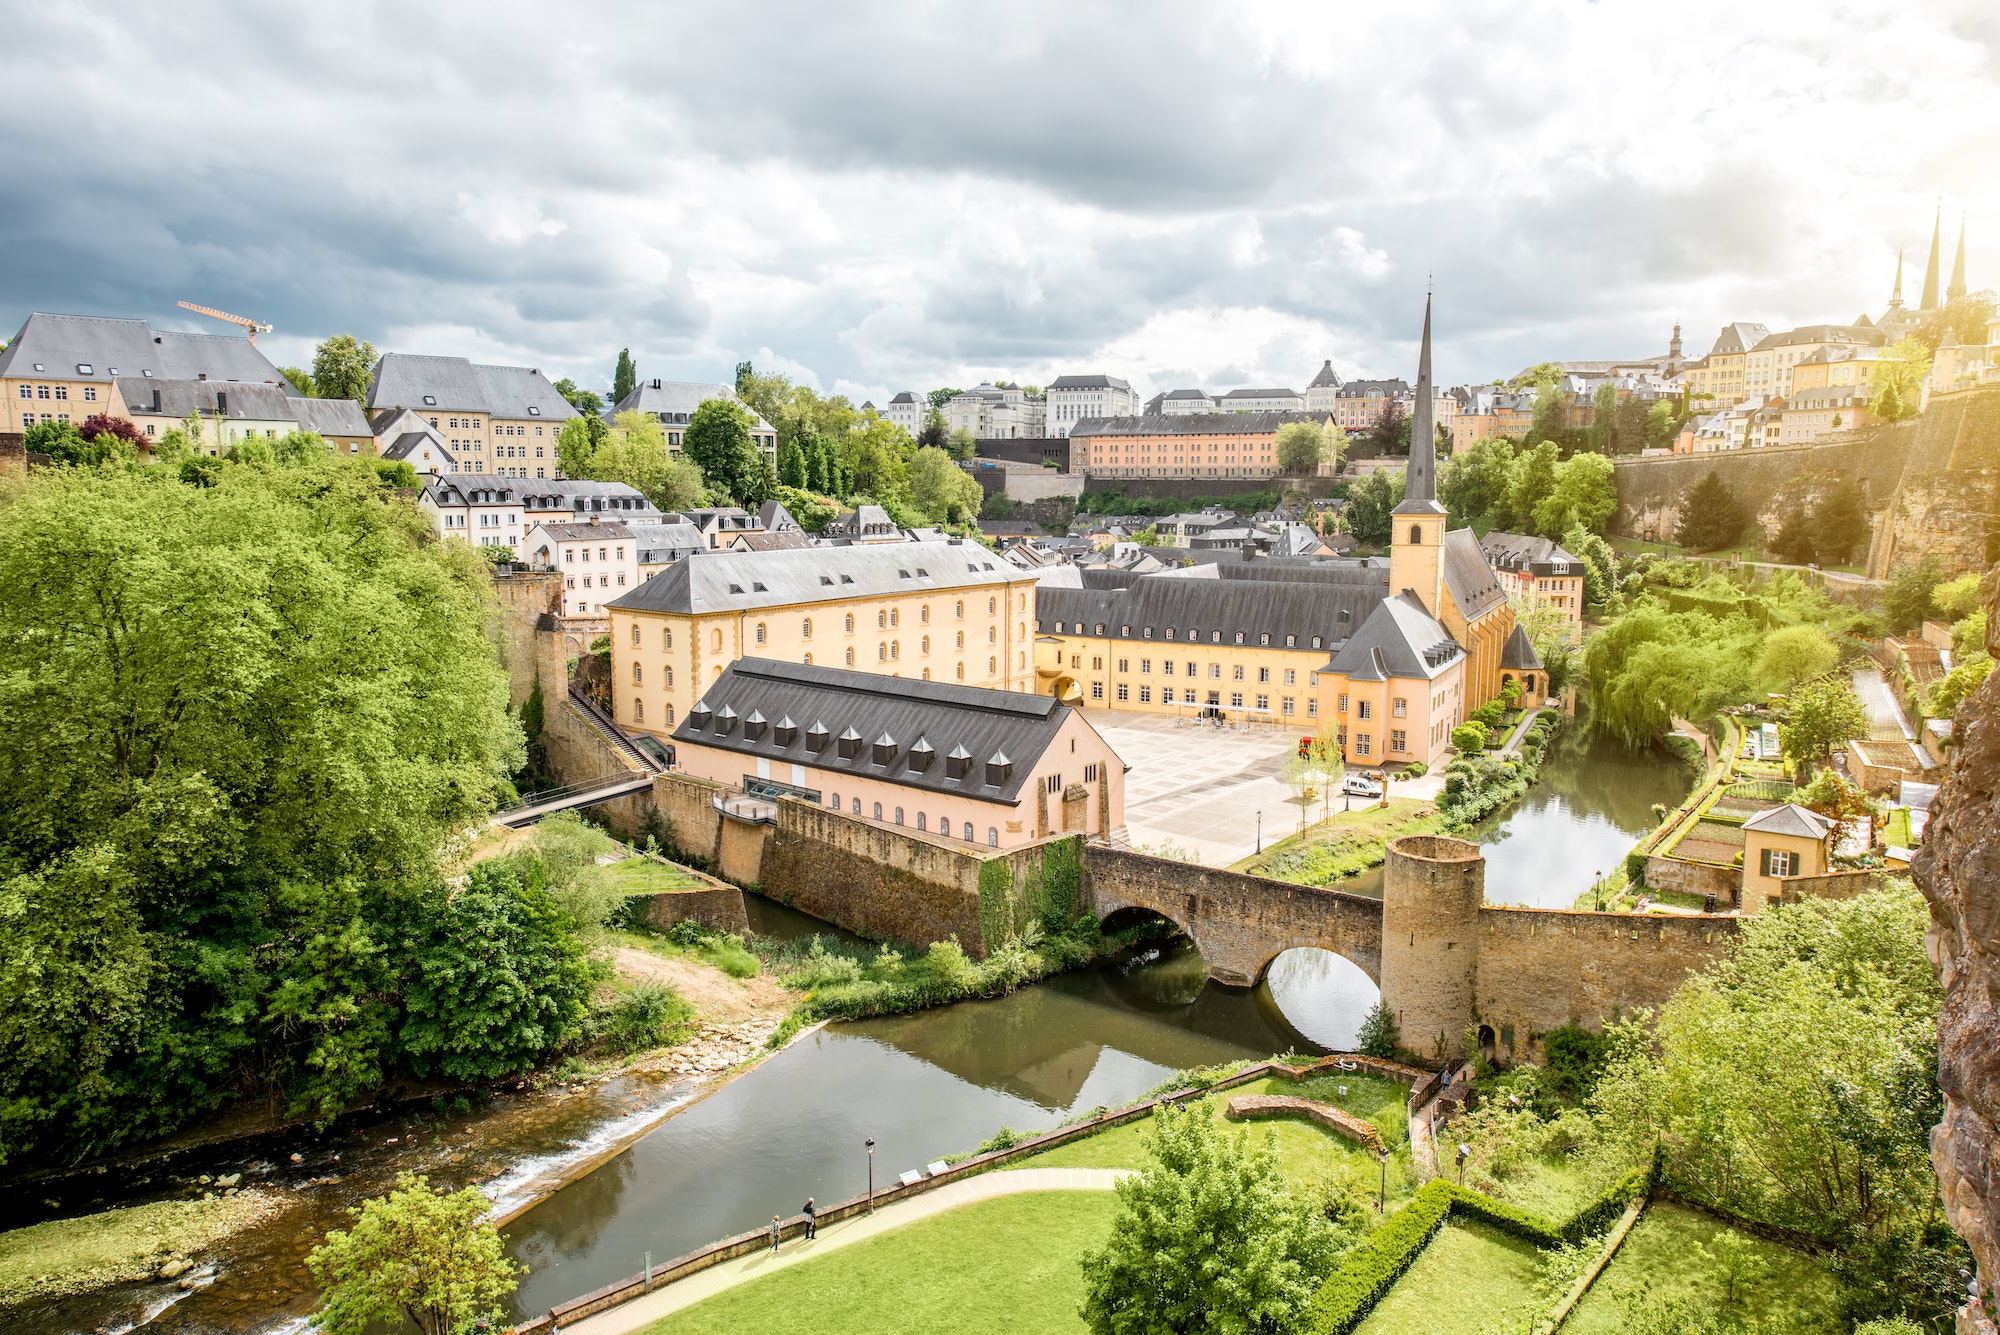 The old town of Luxembourg city